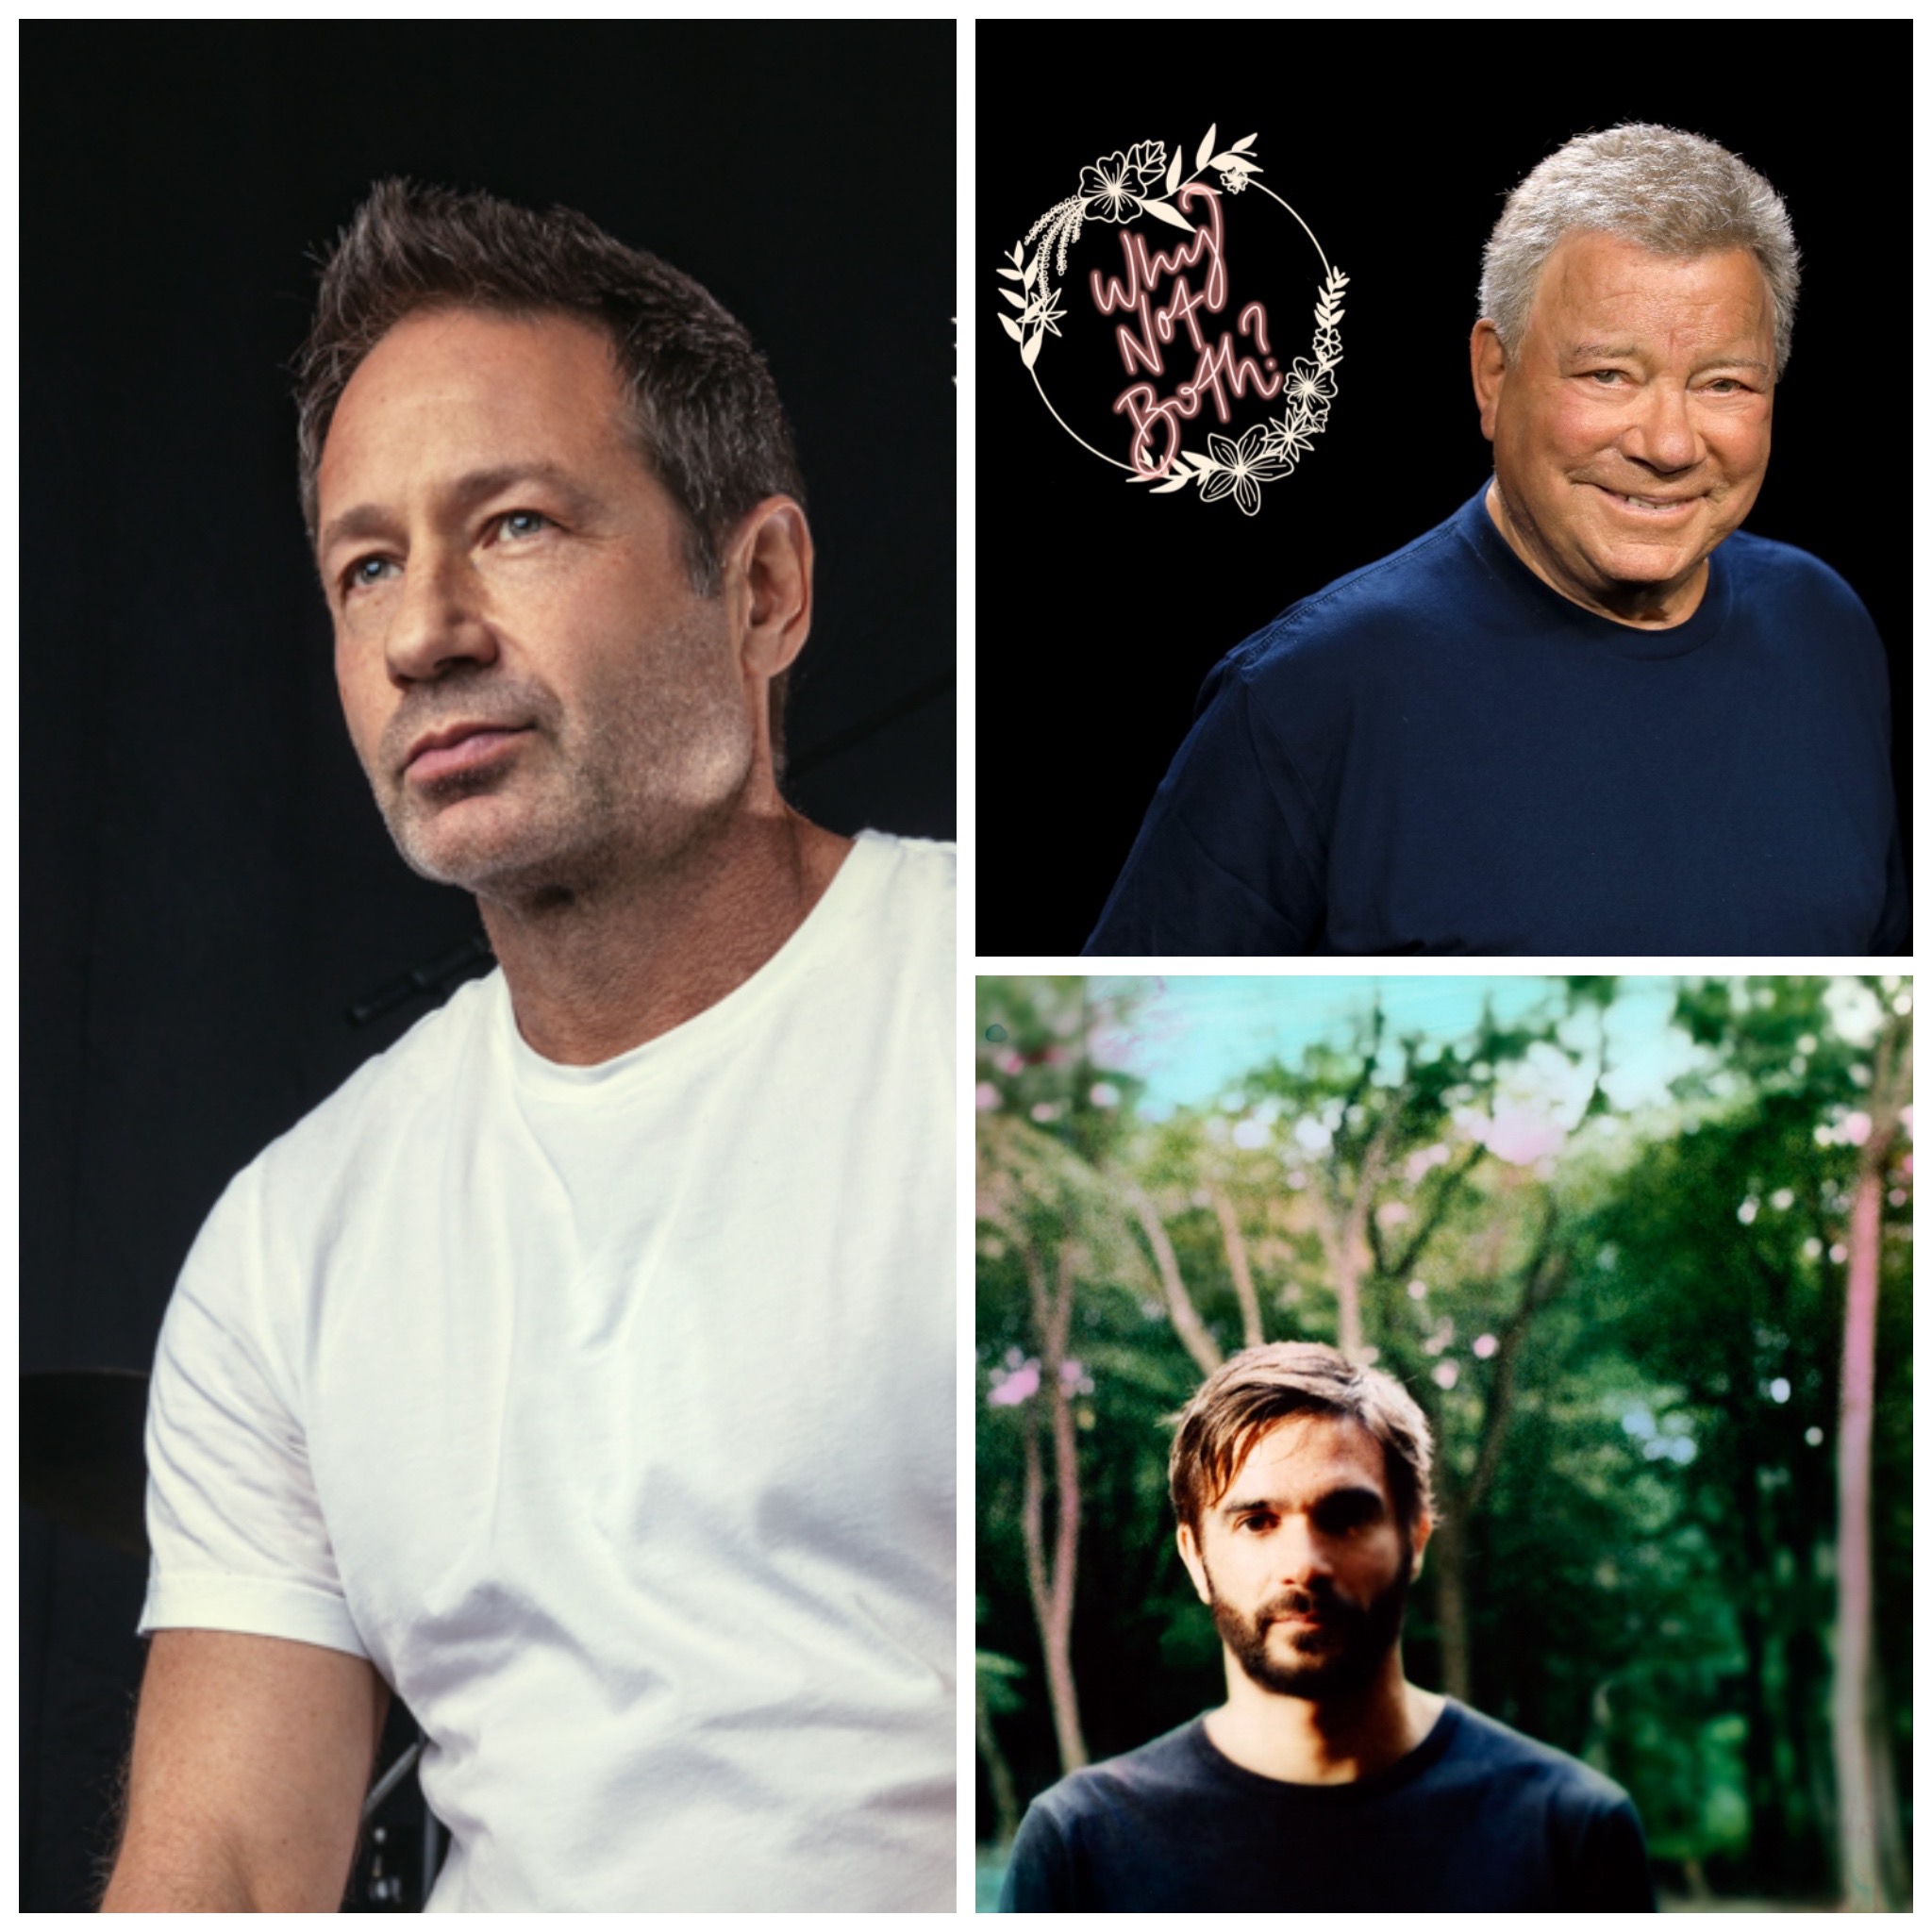 2023/05/24 - The Best of "Why Not Both" Featuring David Duchovny C7CFCFFA-B778-44FF-B6EB-77D8B00E589F